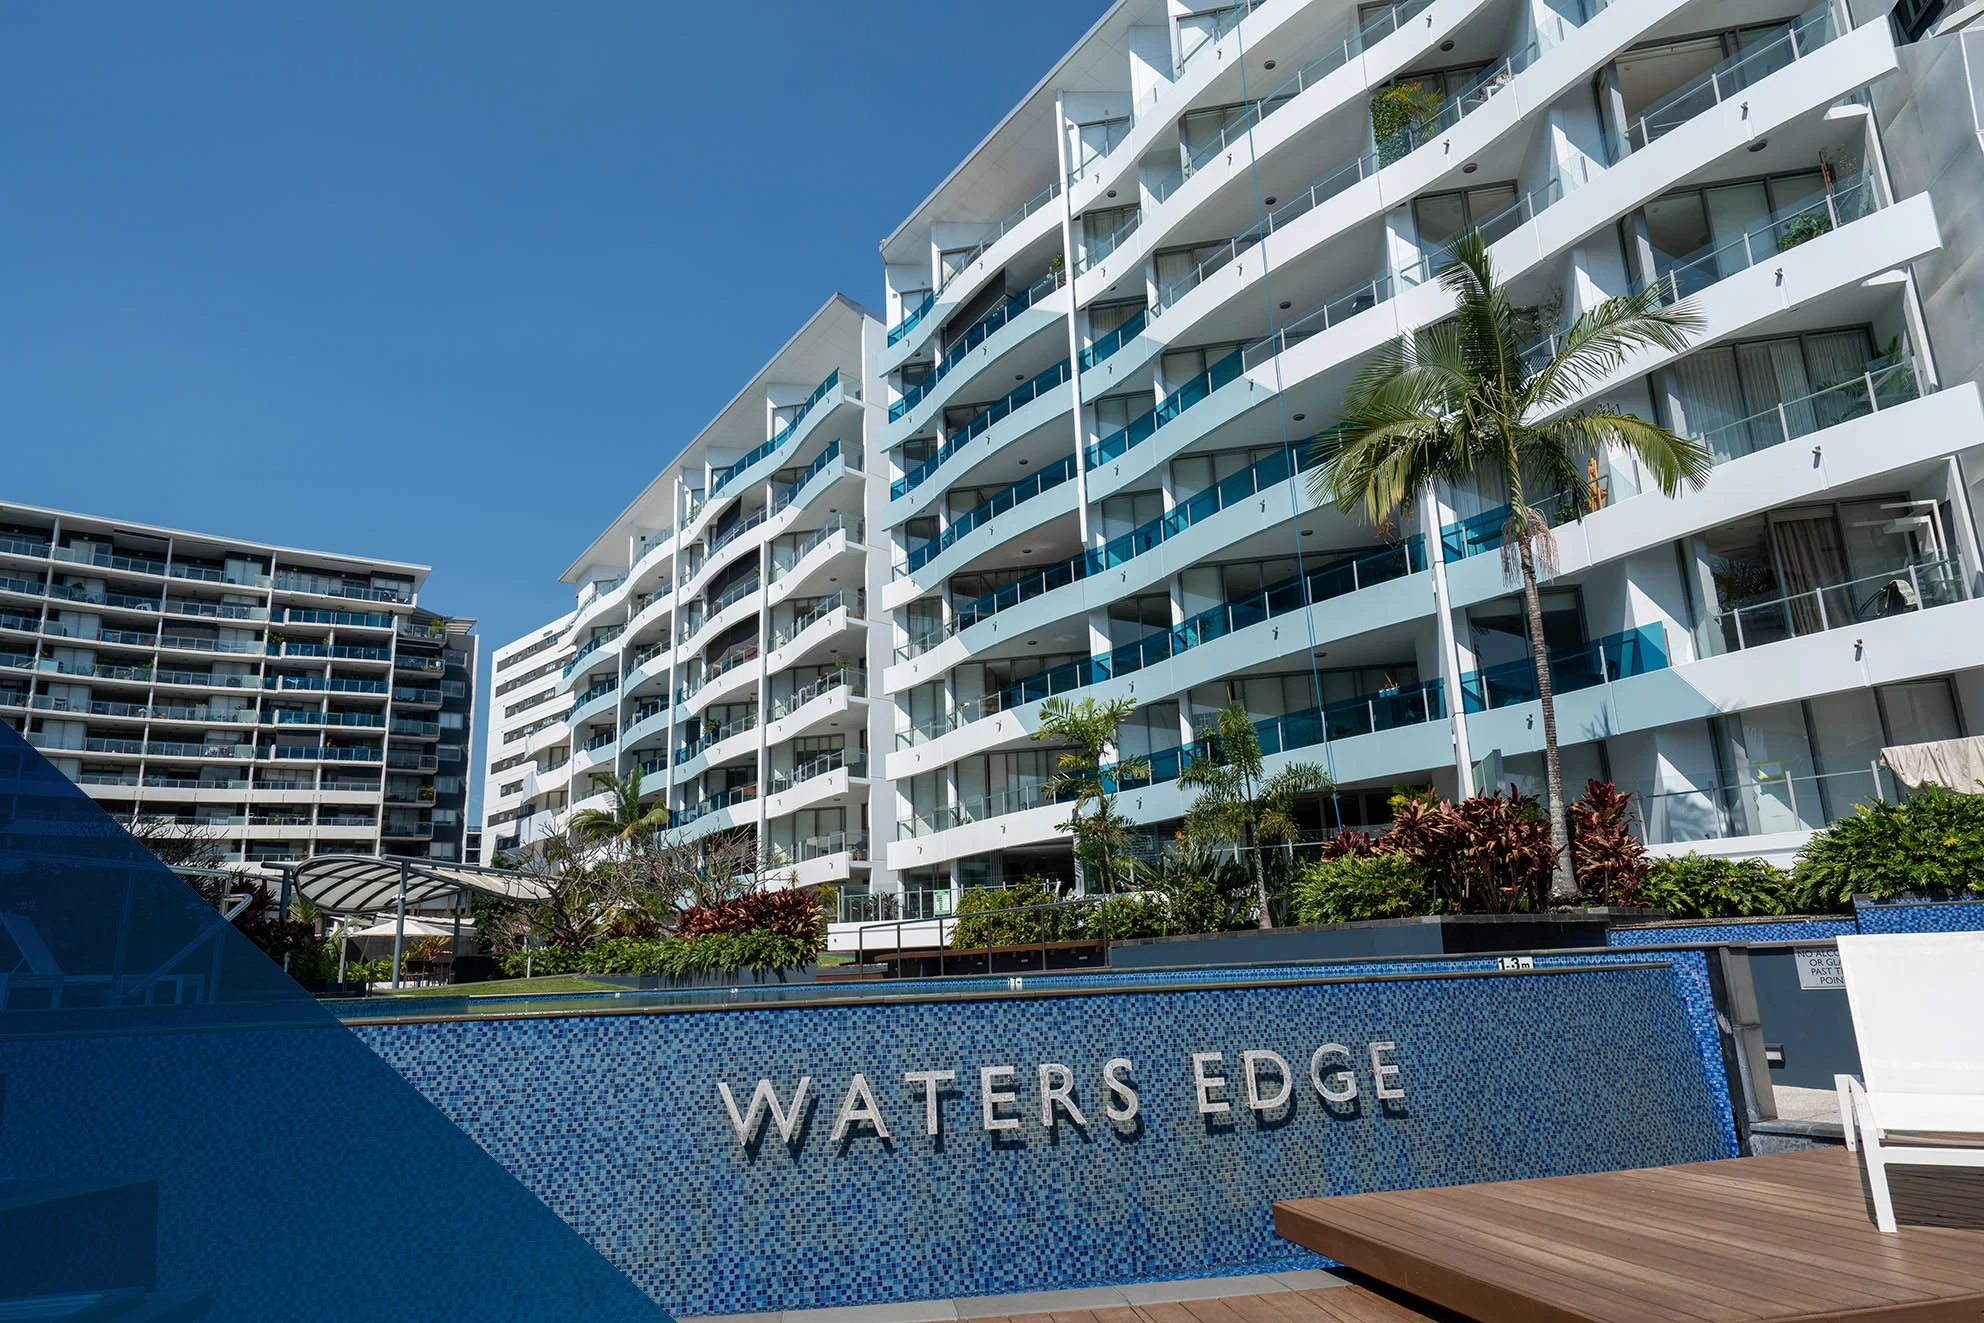 Waters Edge Apartments case study